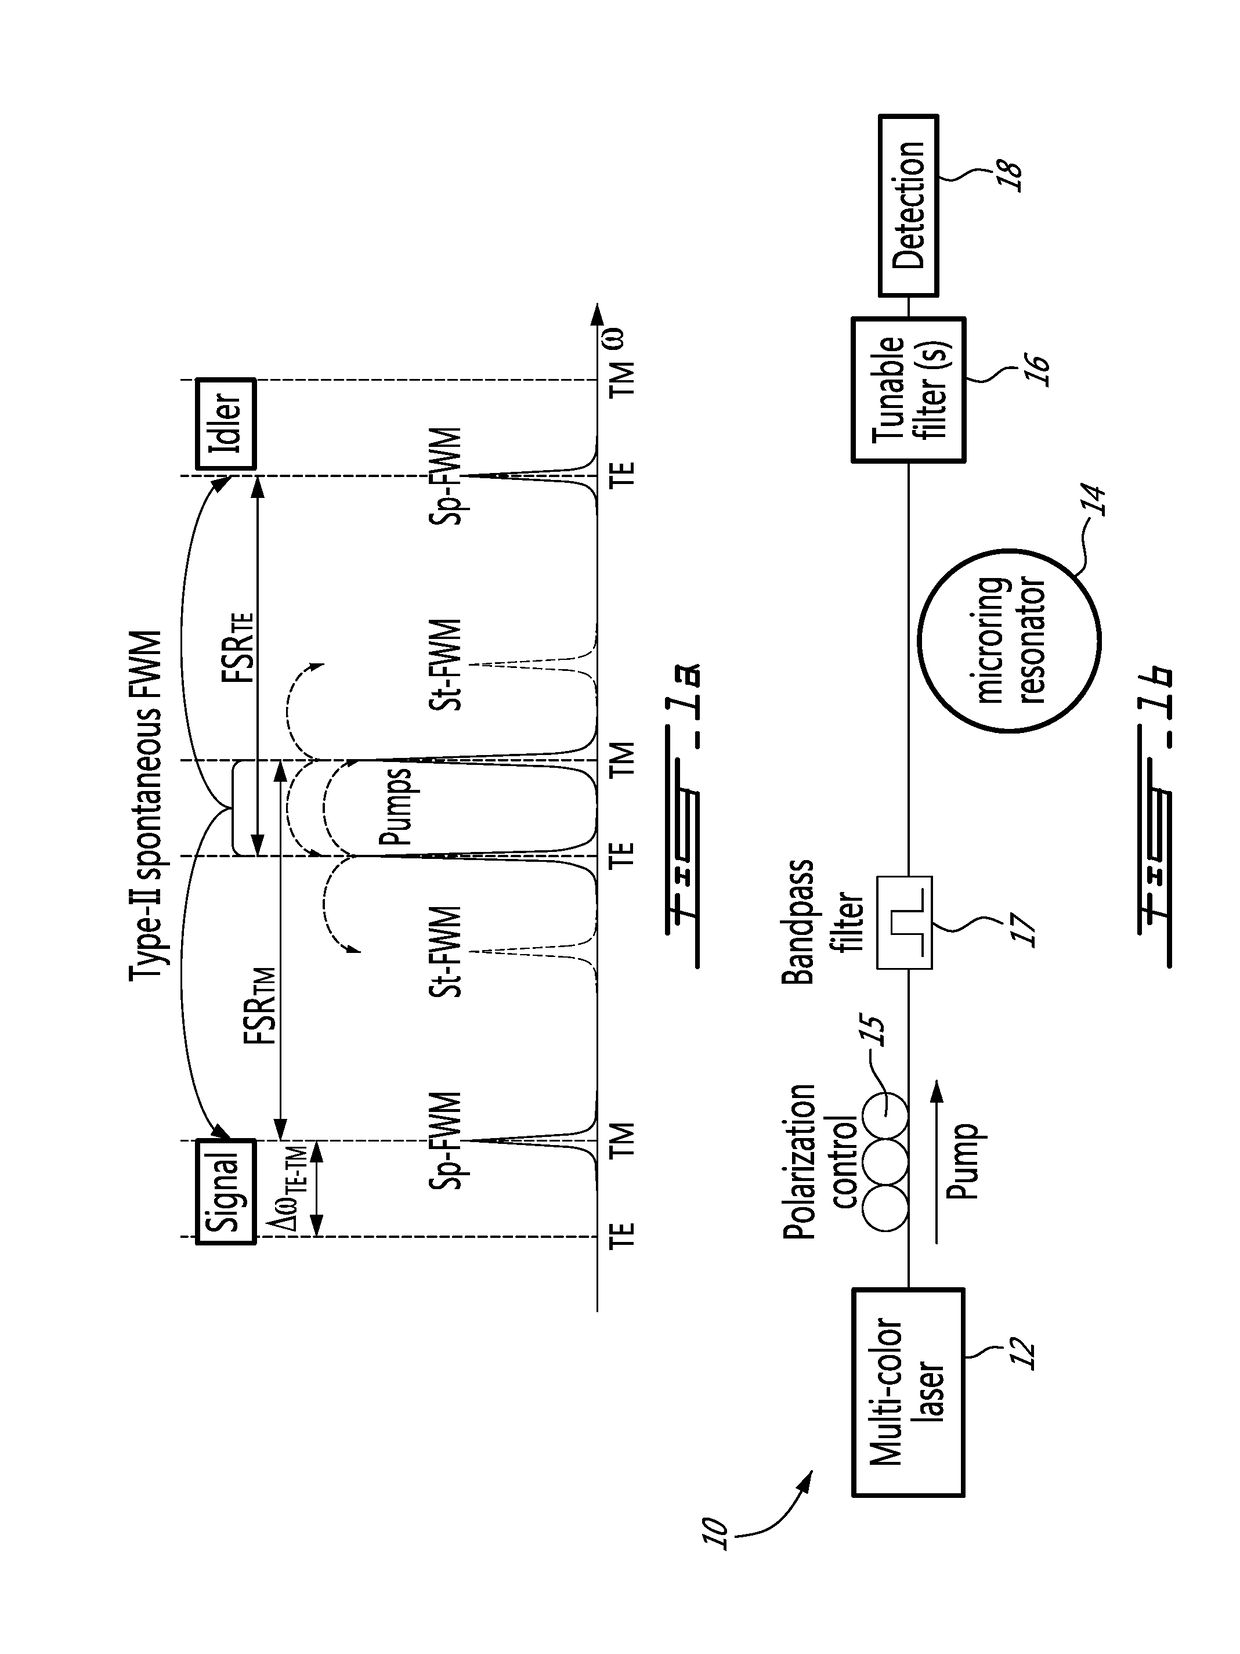 Method and system for the generation of optical multipartite quantum states